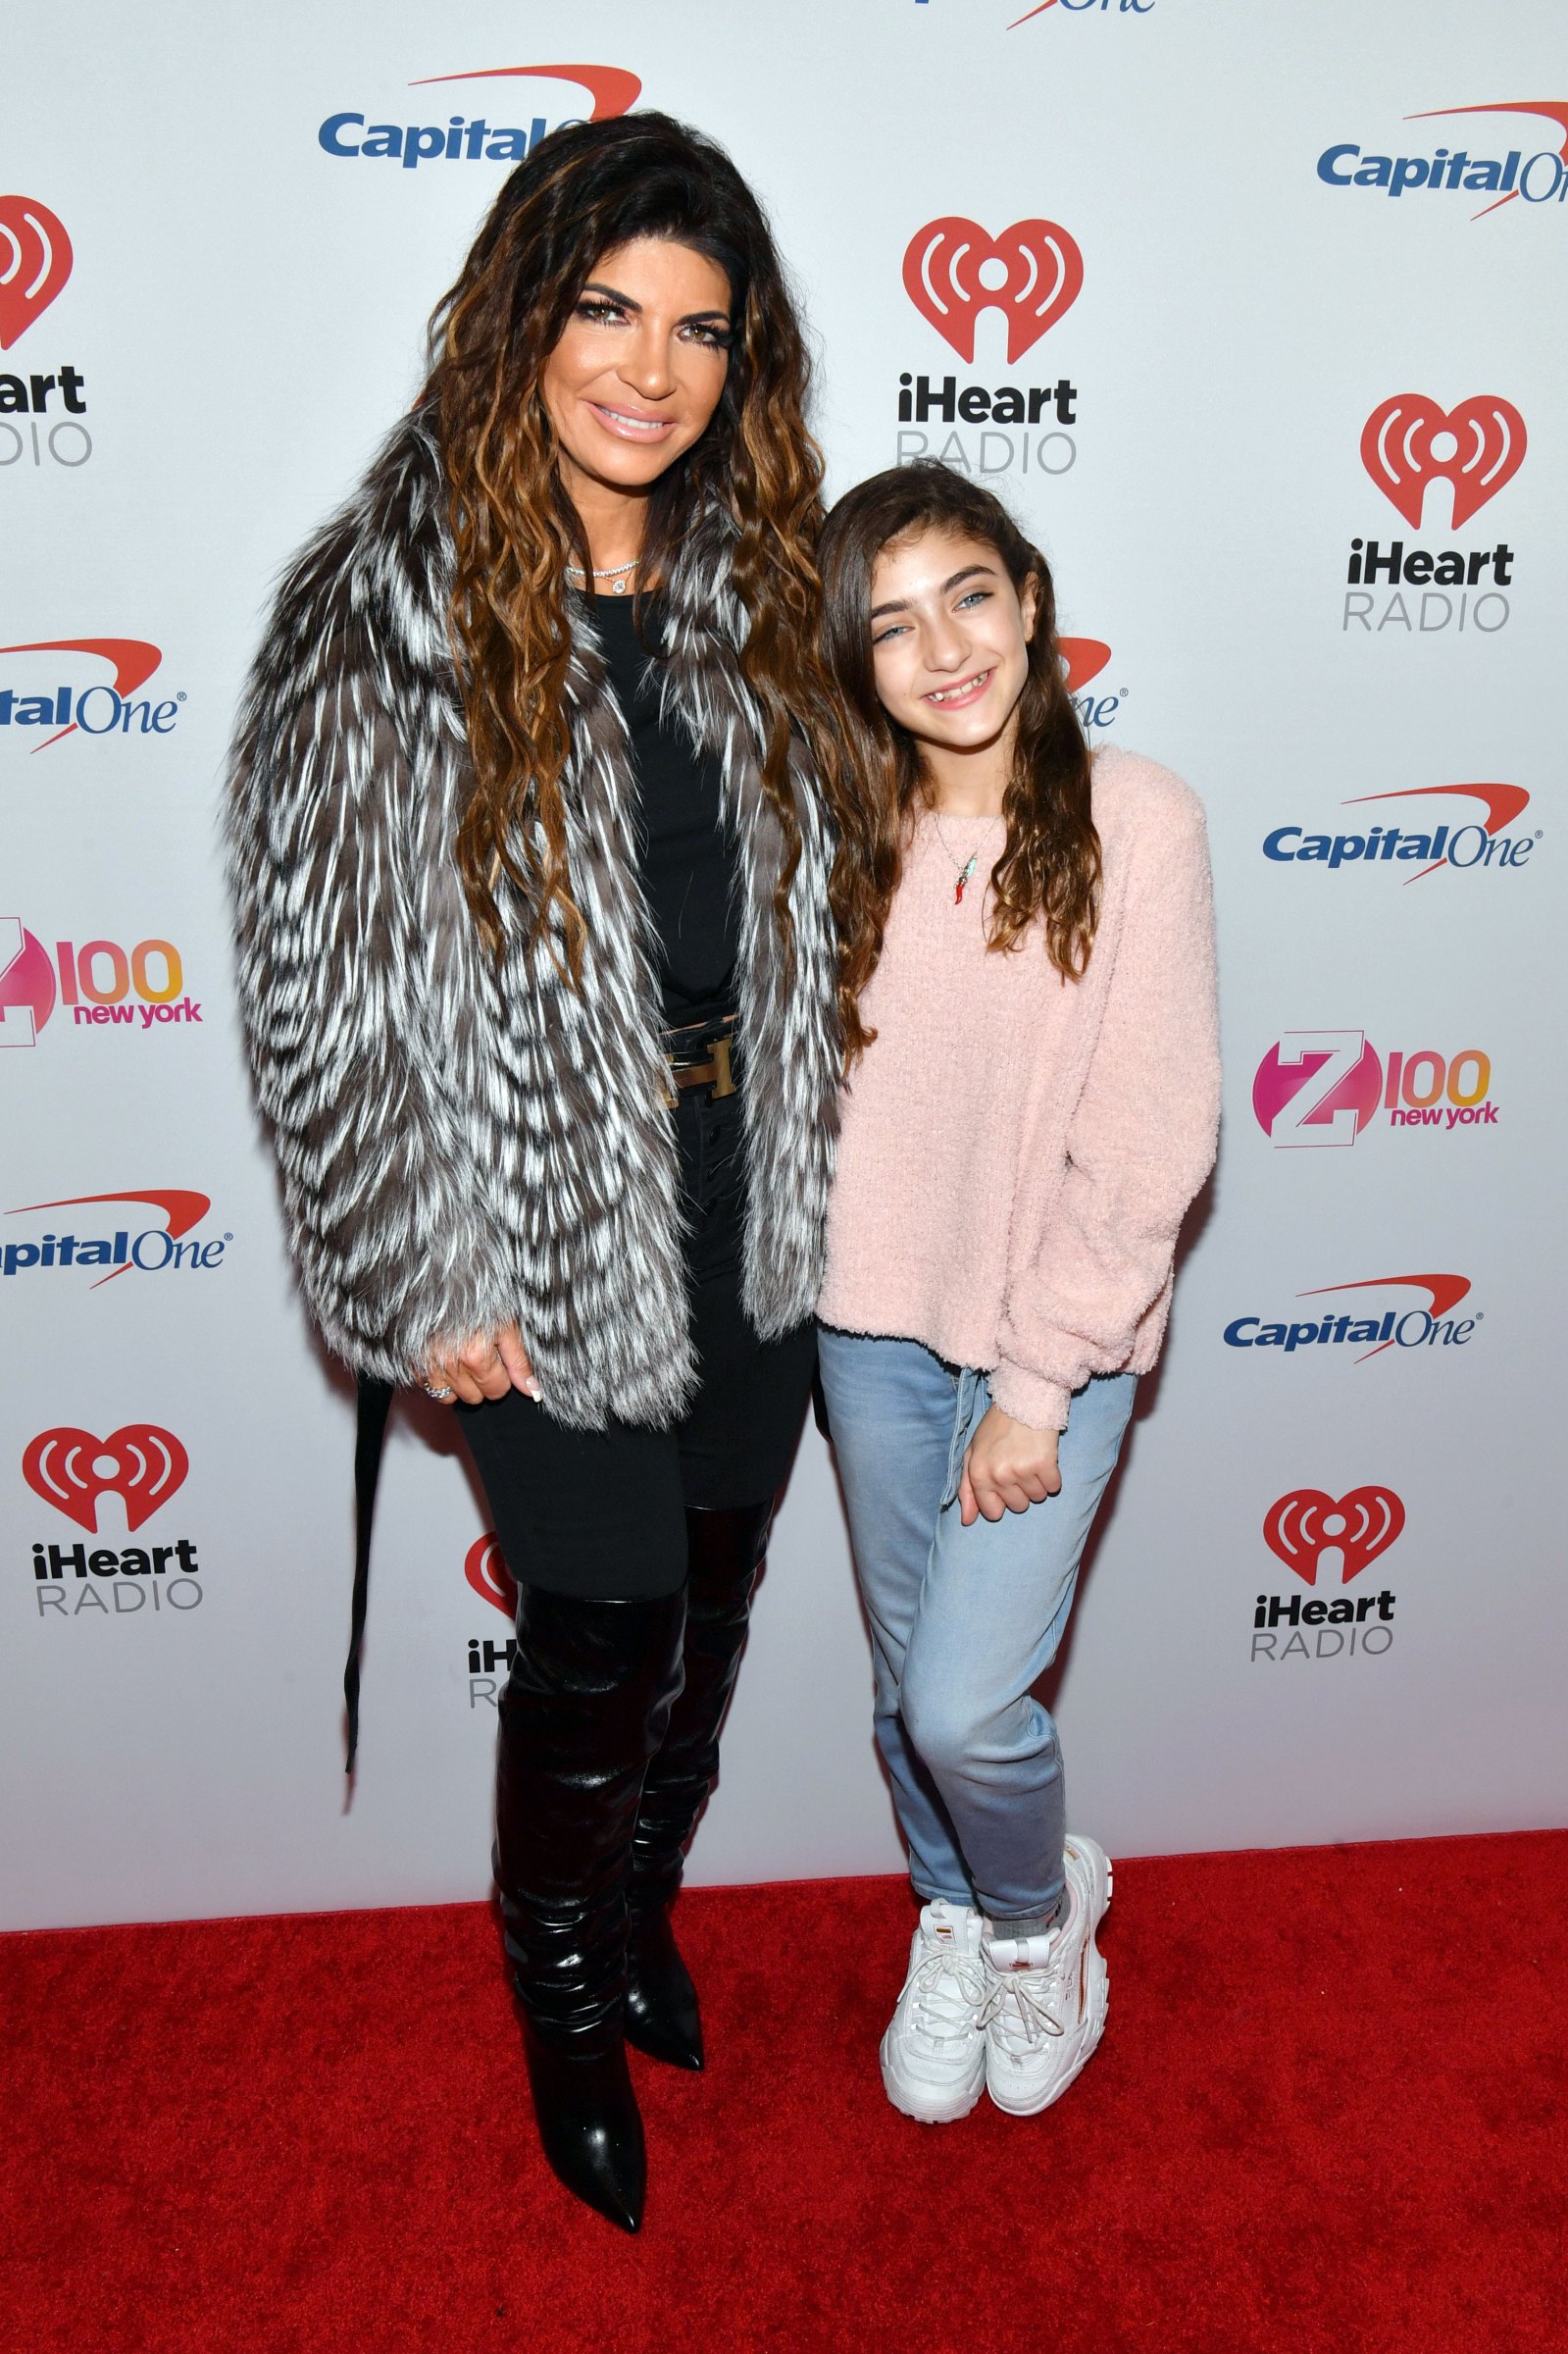 Teresa Giudice Says Her Family Is 'Still Deciding' Their Holiday Plans — Plus, More Stars at Jingle Ball